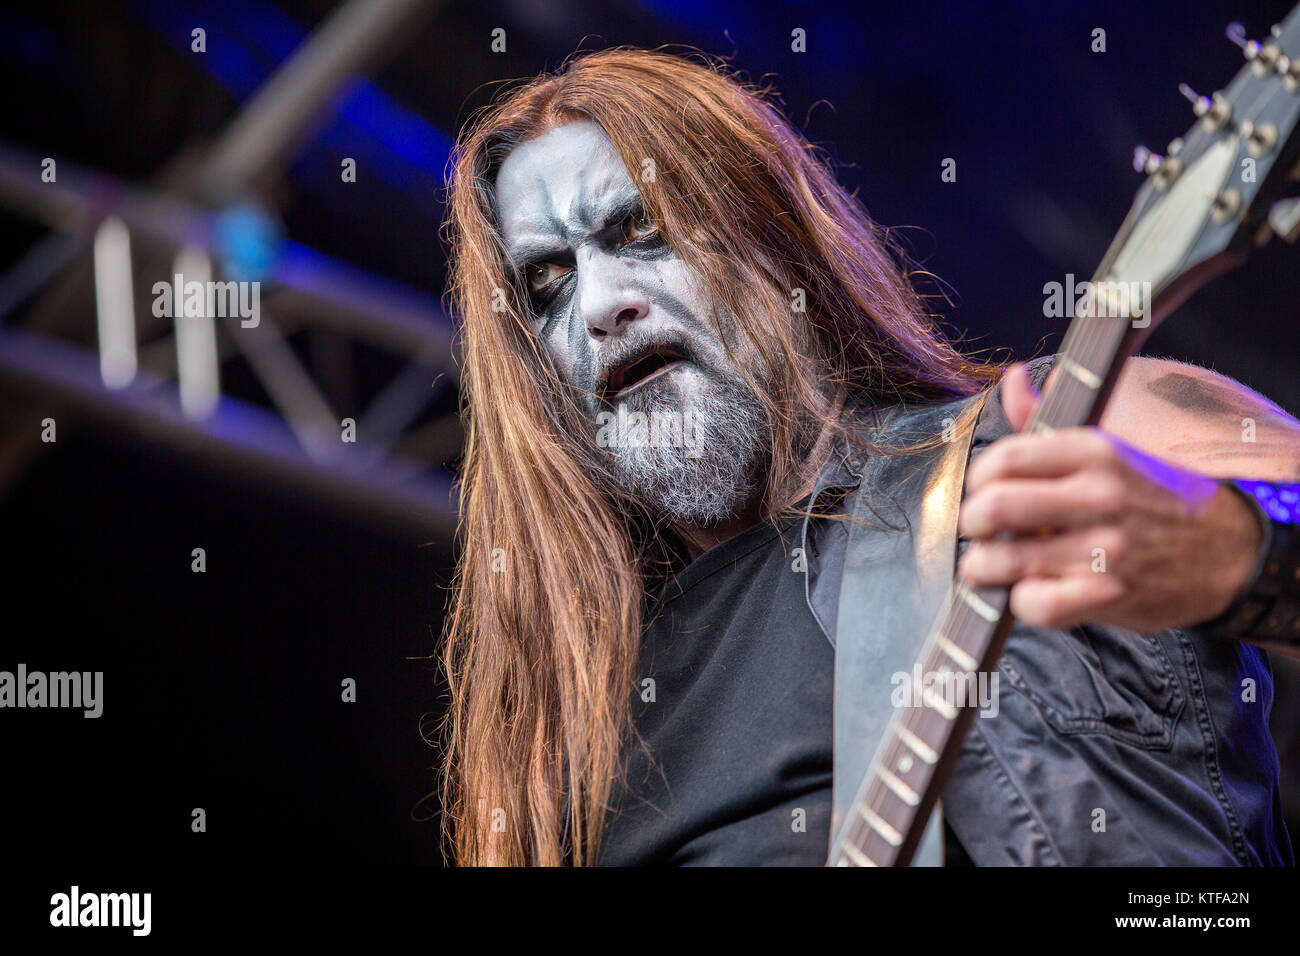 Norway, Borre – August 18, 2017. The Norwegian black metal band Gaahls Wyrd performs a live concert during the Norwegian metal festival Midgardsblot Festival 2017 in Borre. (Photo credit: Terje Dokken) Stock Photo